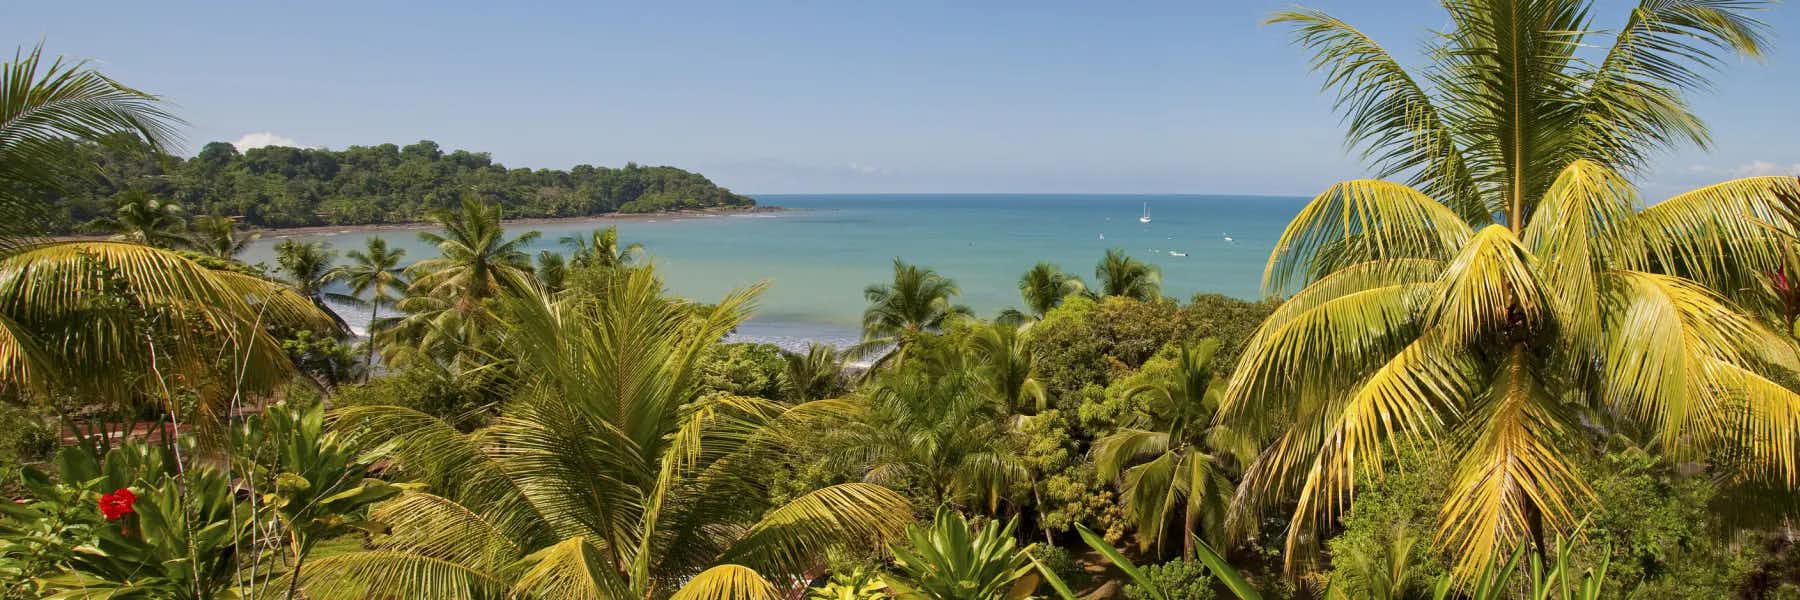 Cost of Living in Costa Rica